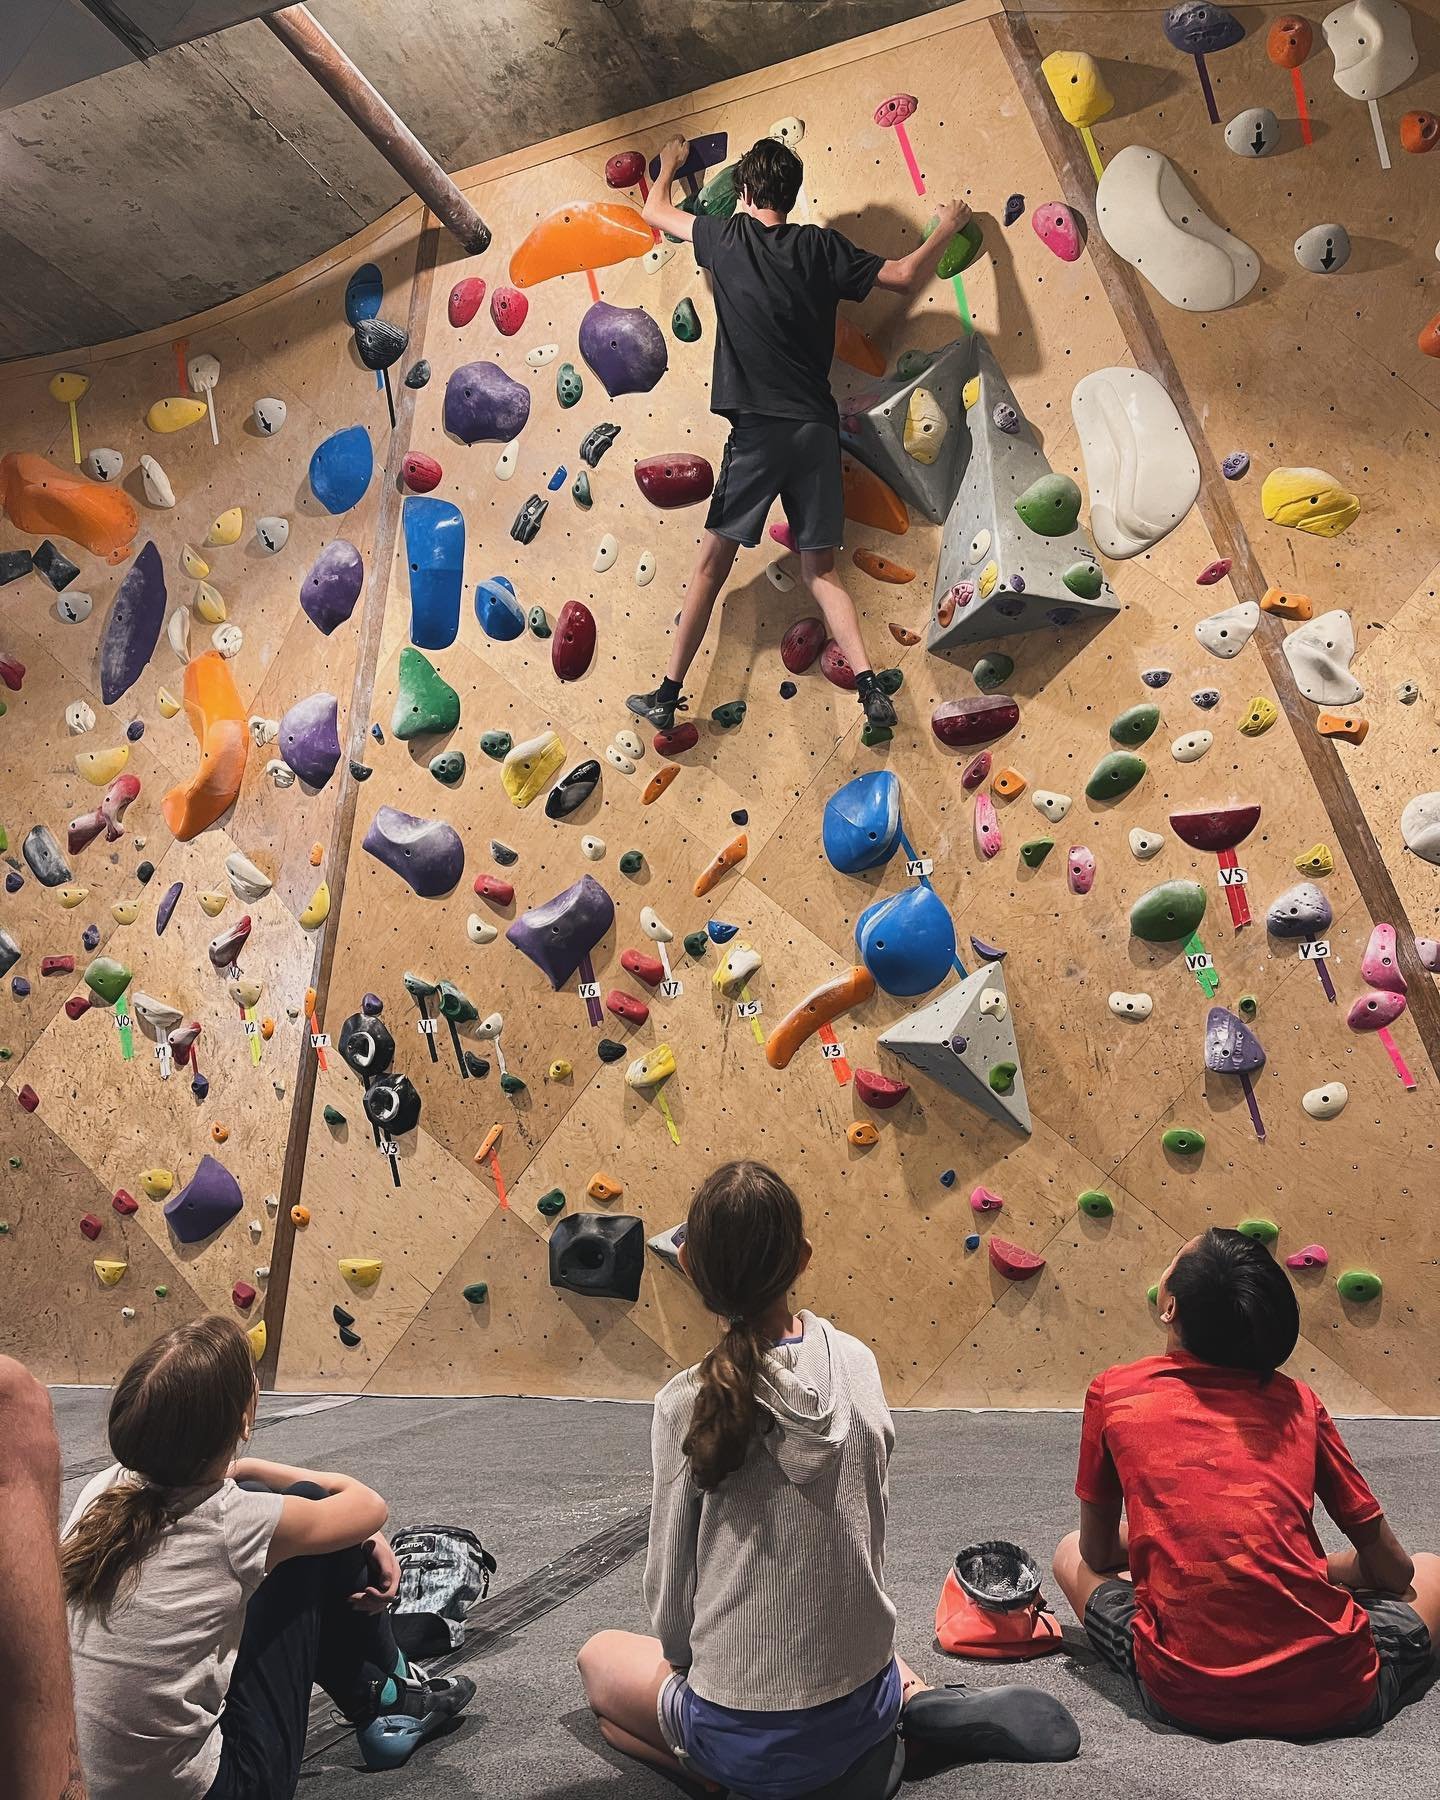 Our Recreational Summer Camp is a great way to get a start in bouldering in a fun social way! Your kid will join our incredible coaches and other campers at our Upper East Side location for climbing classes, fitness education, games, and so much more